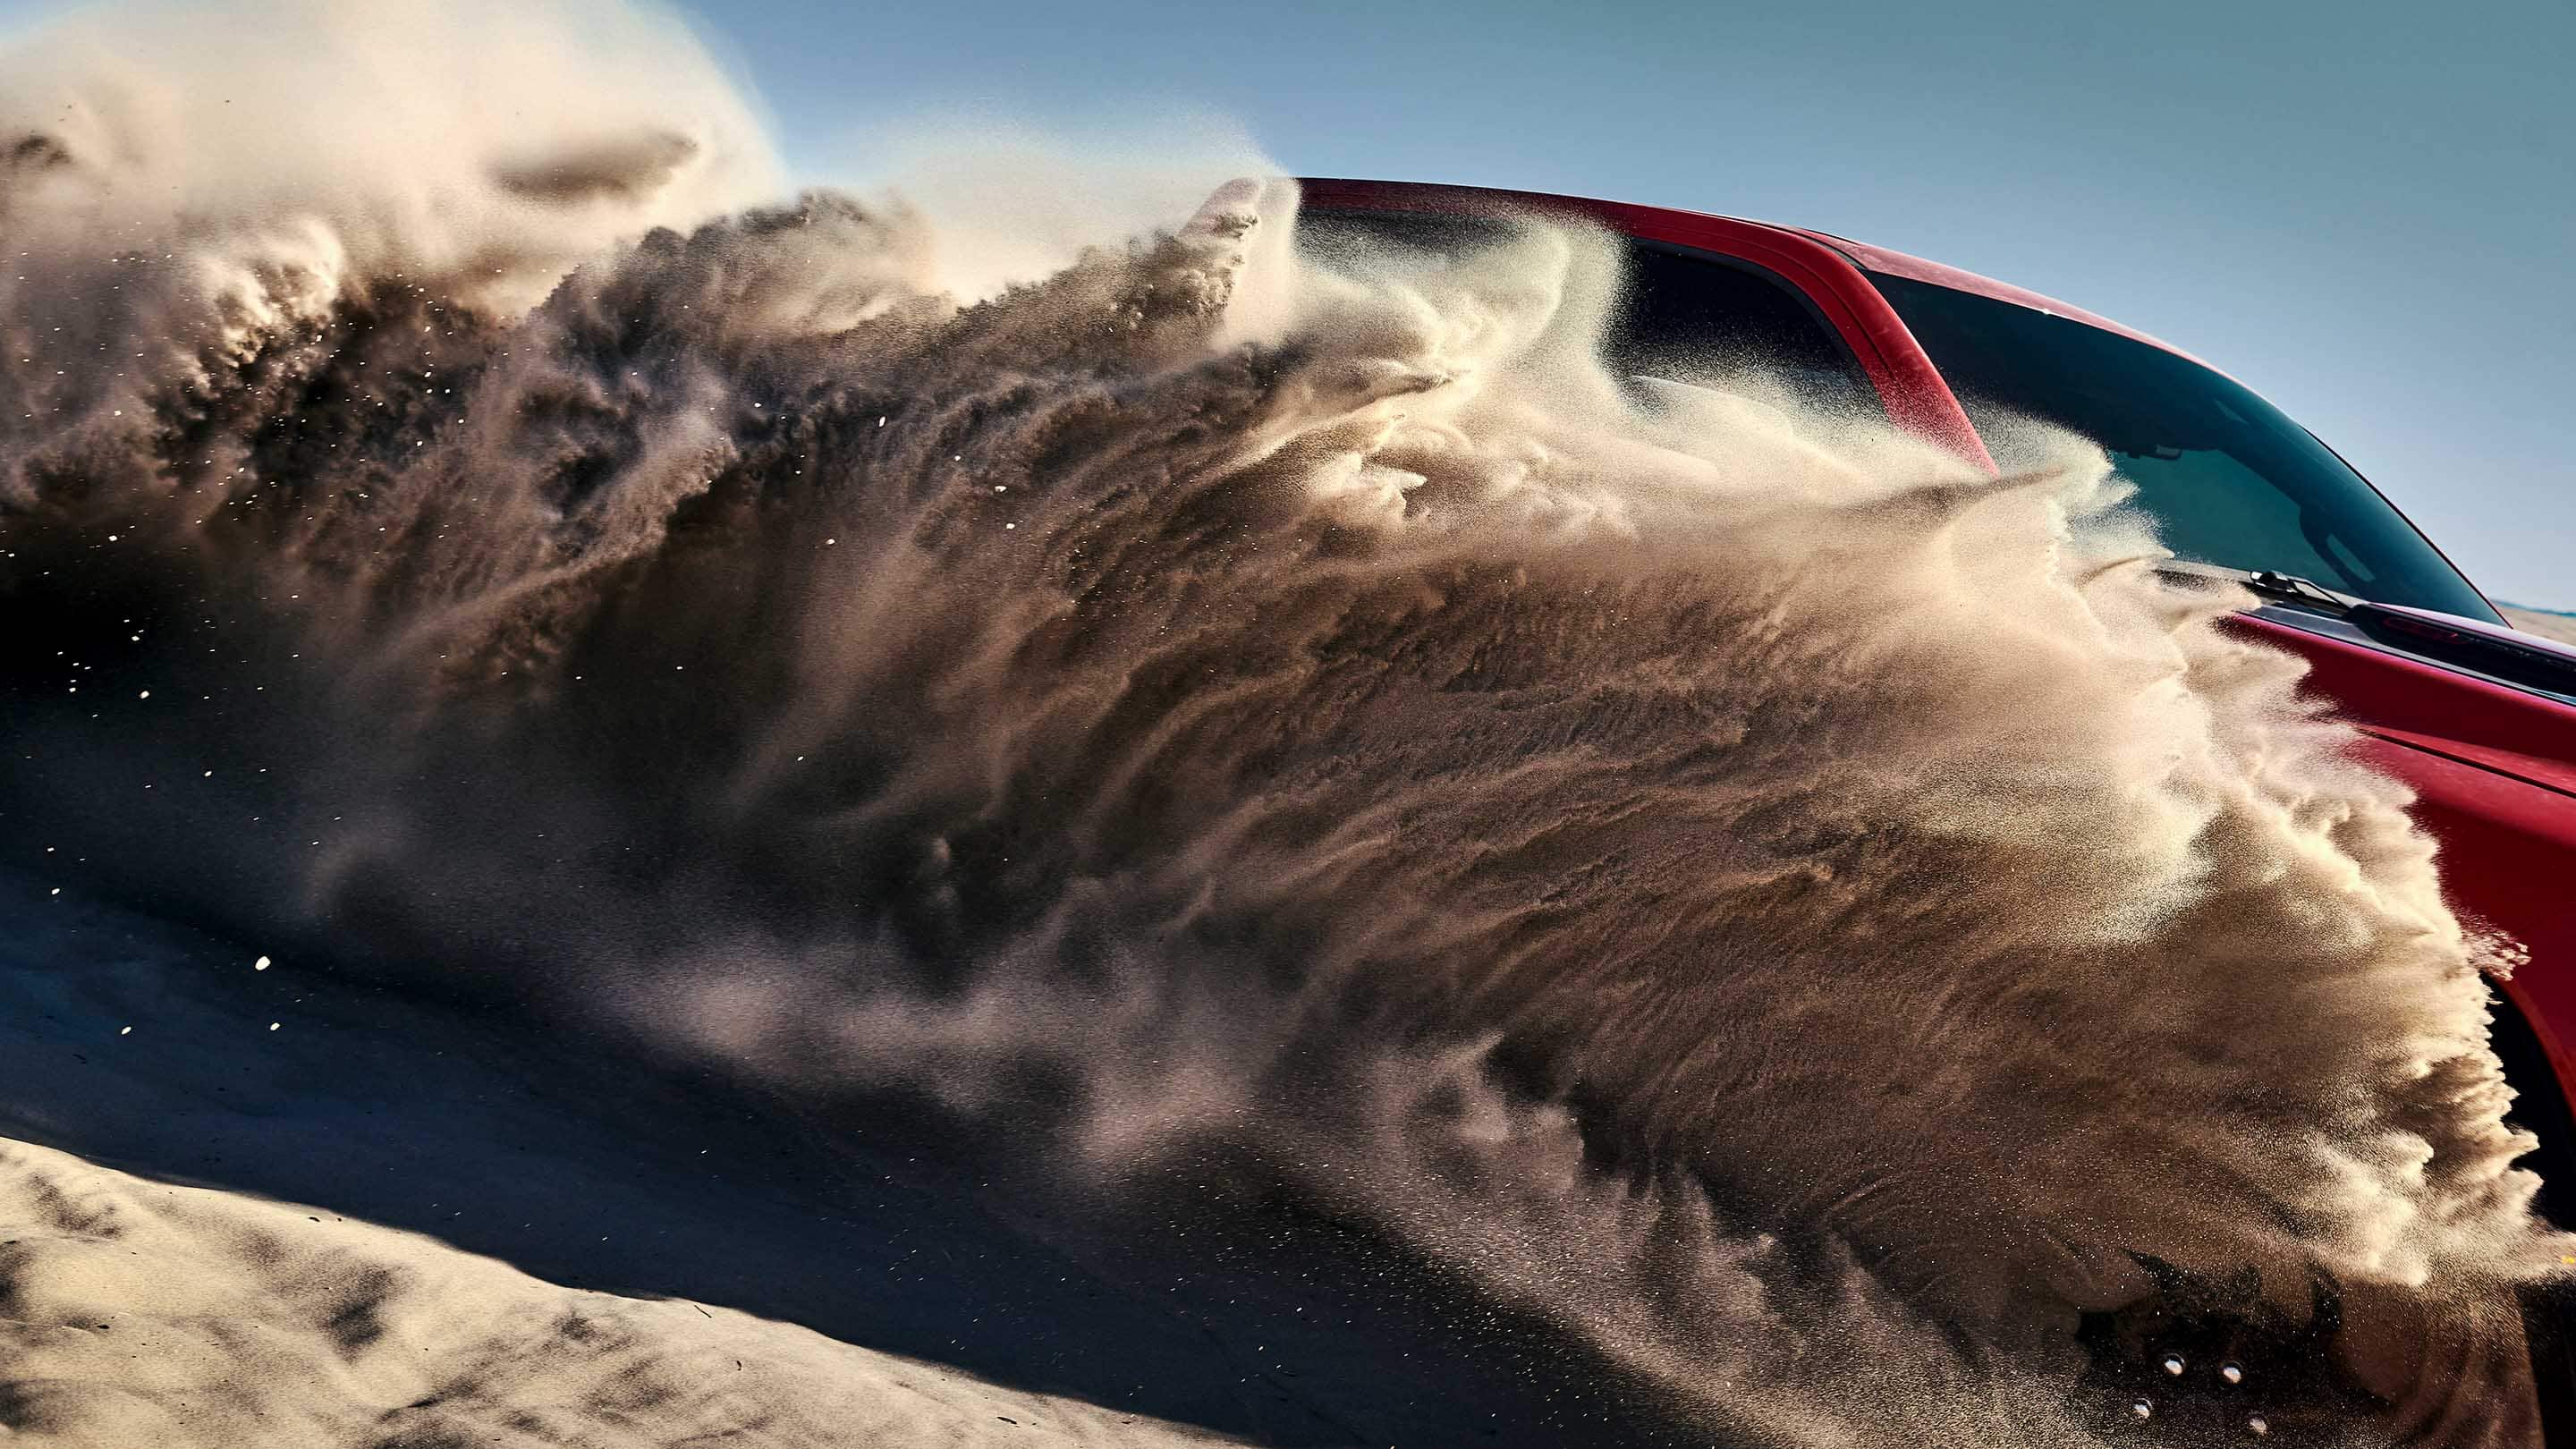 The 2021 Ram 1500 TRX churning up a cloud of sand from its wheels.